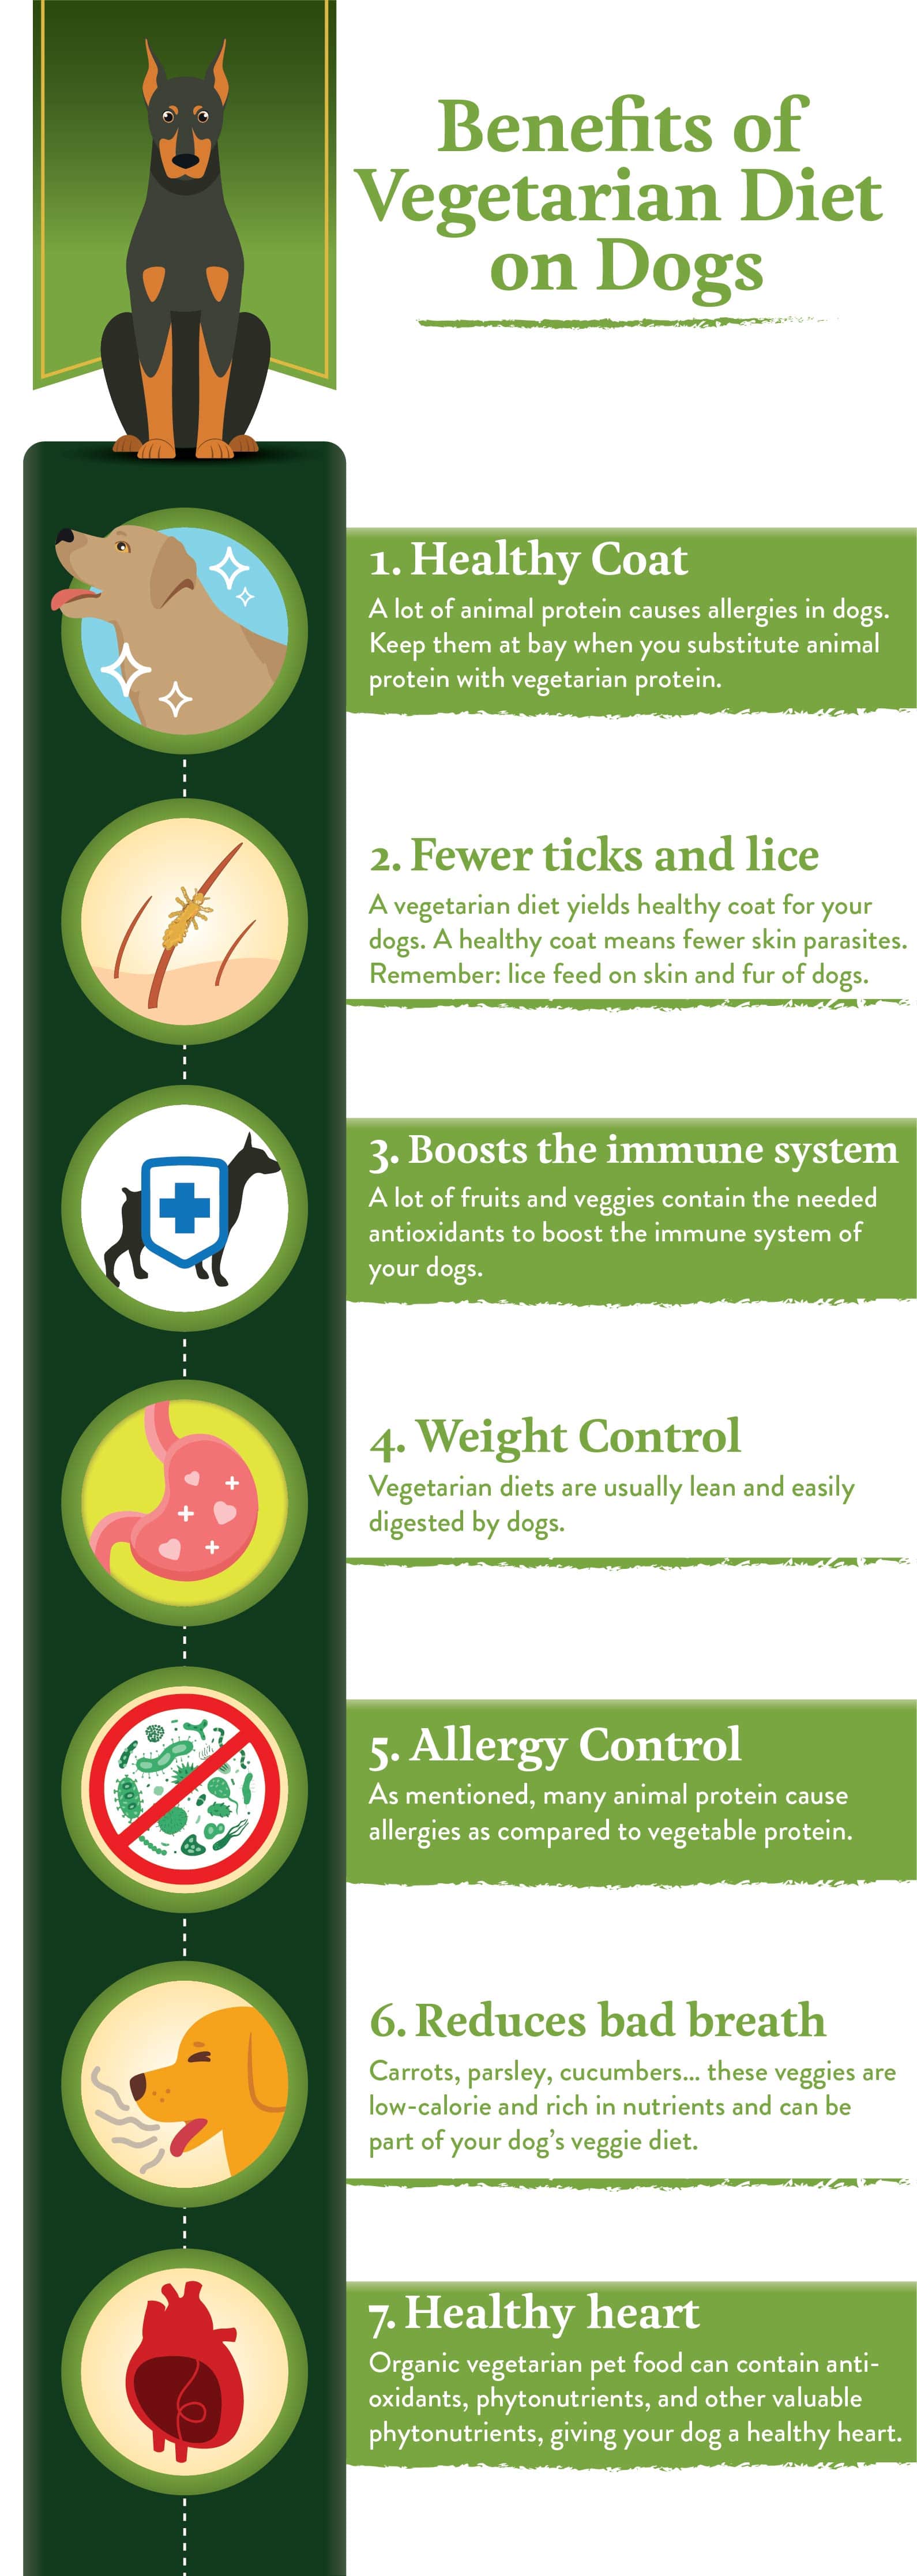 Benefits of a Vegetarian Diet on Dogs infographic